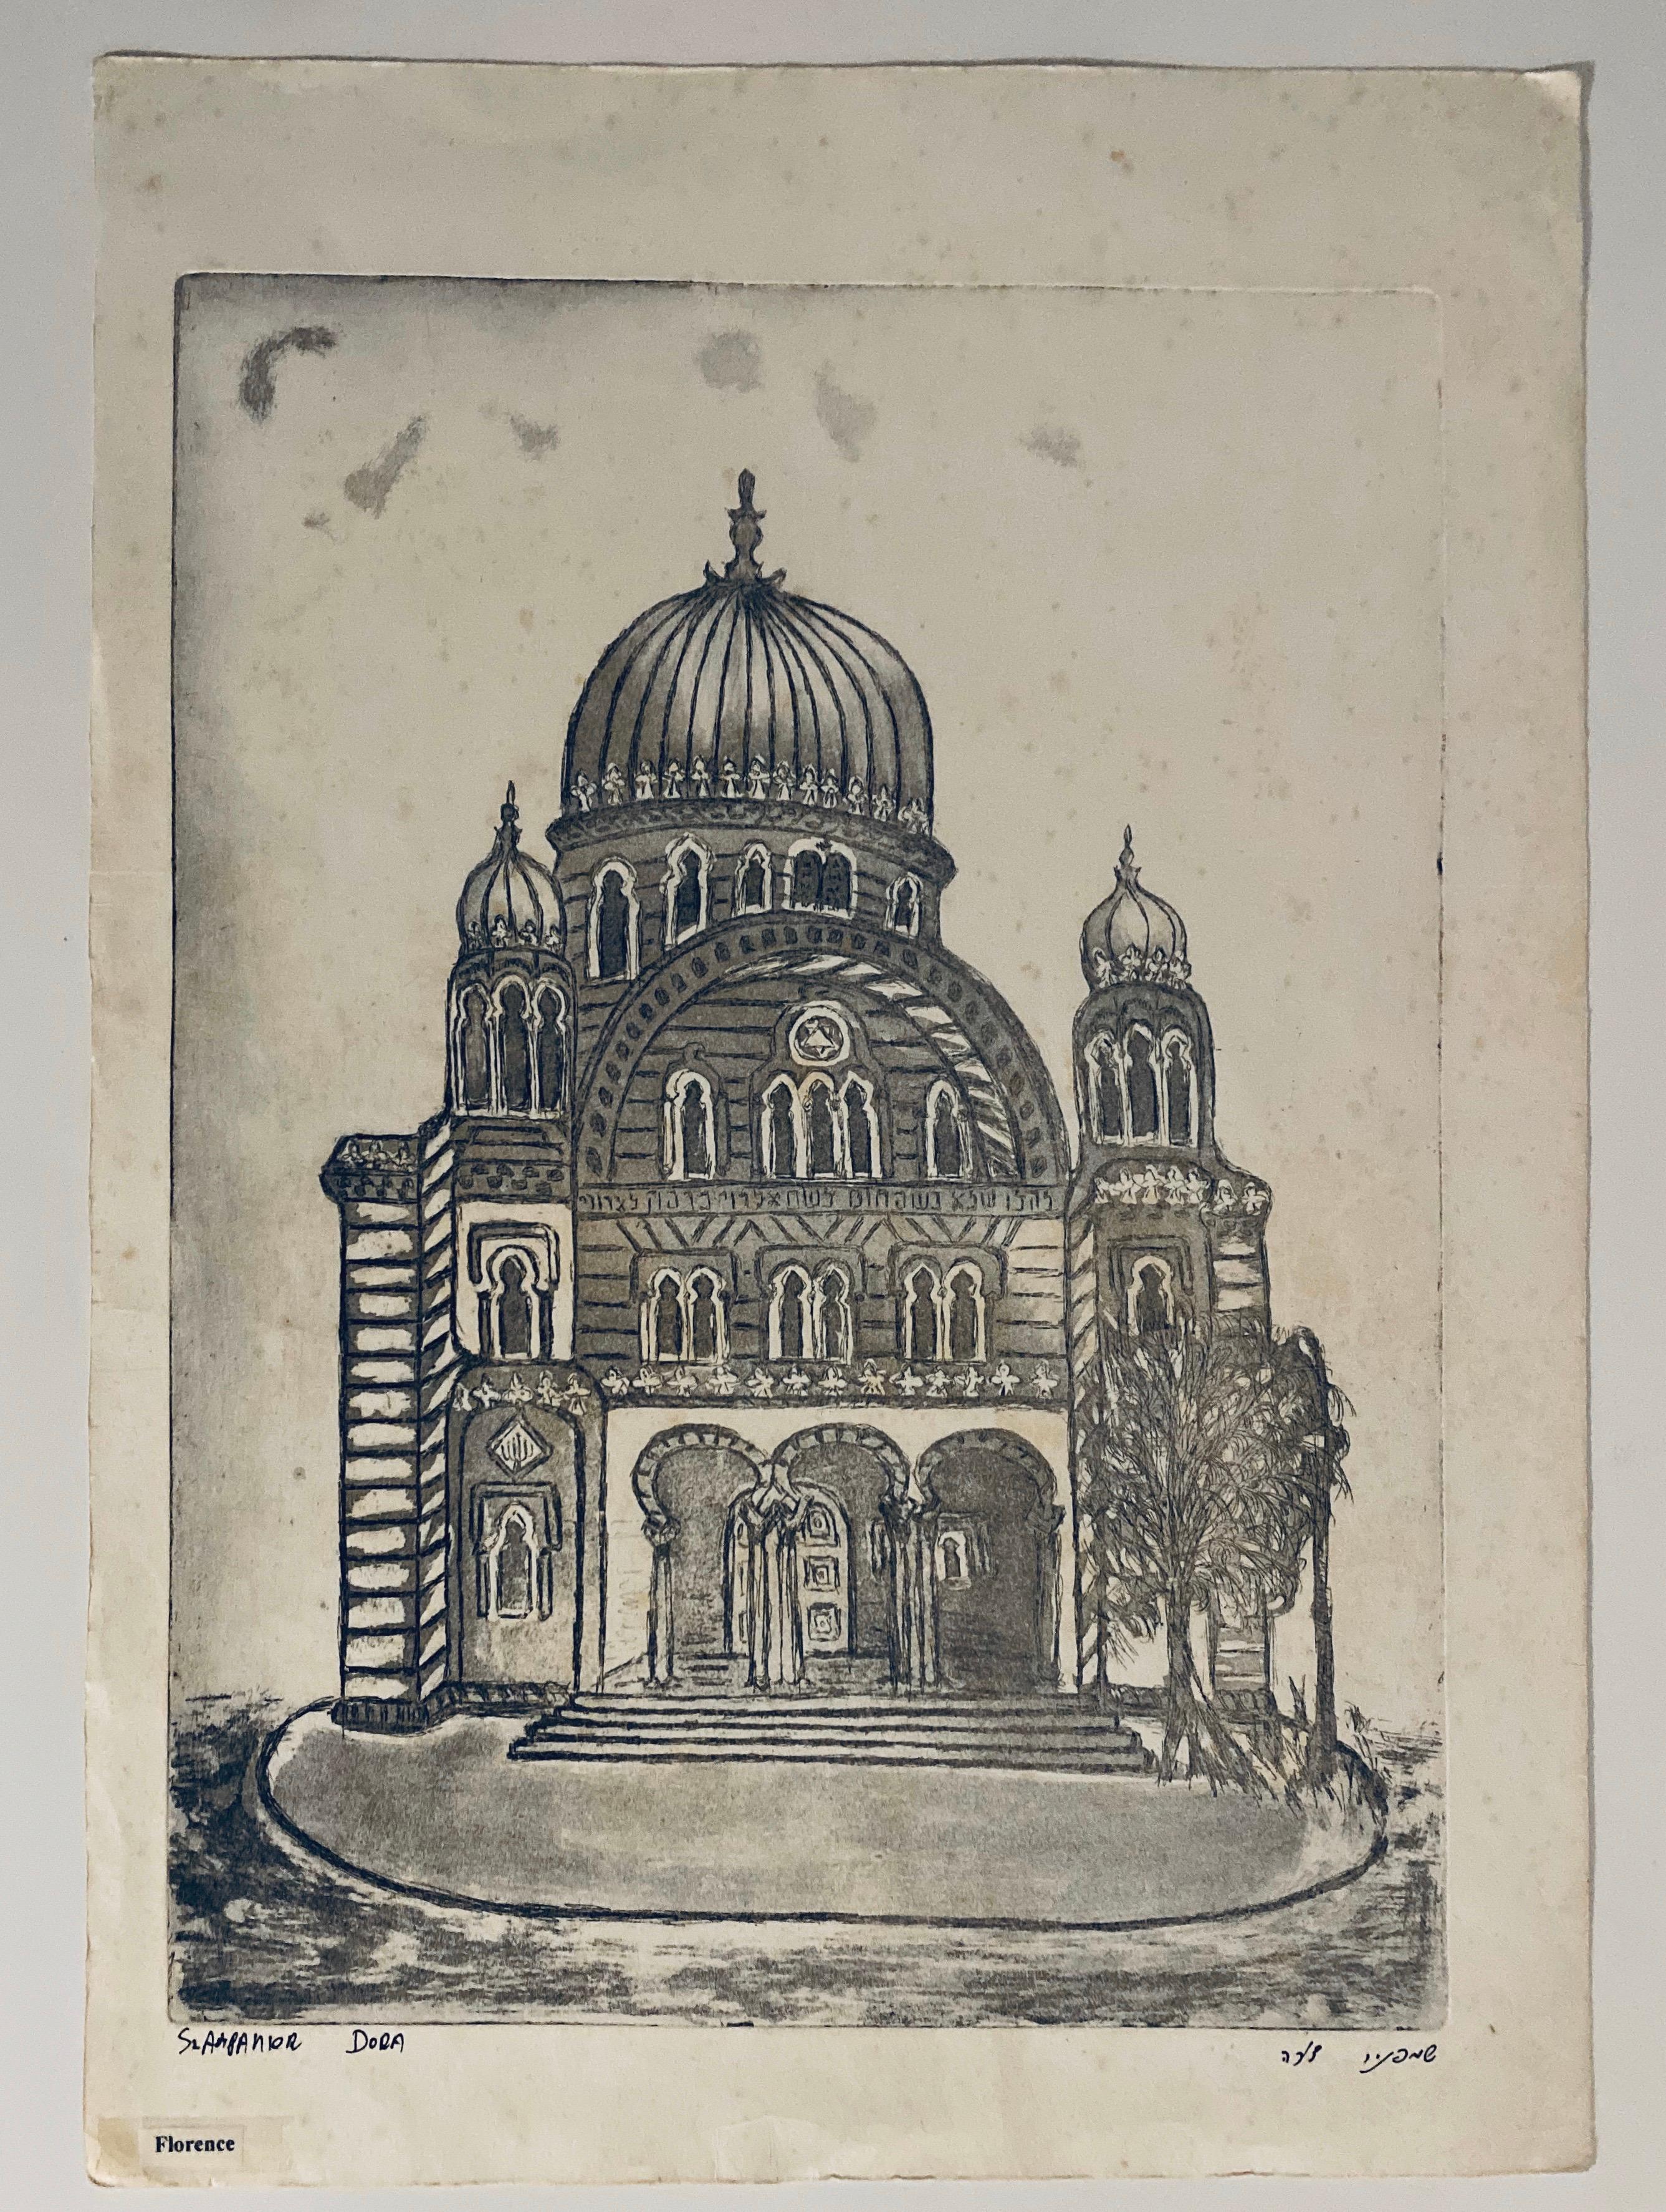 Etching of destroyed synagogue - Florence, Italy - Folk Art Print by Dora Szampanier